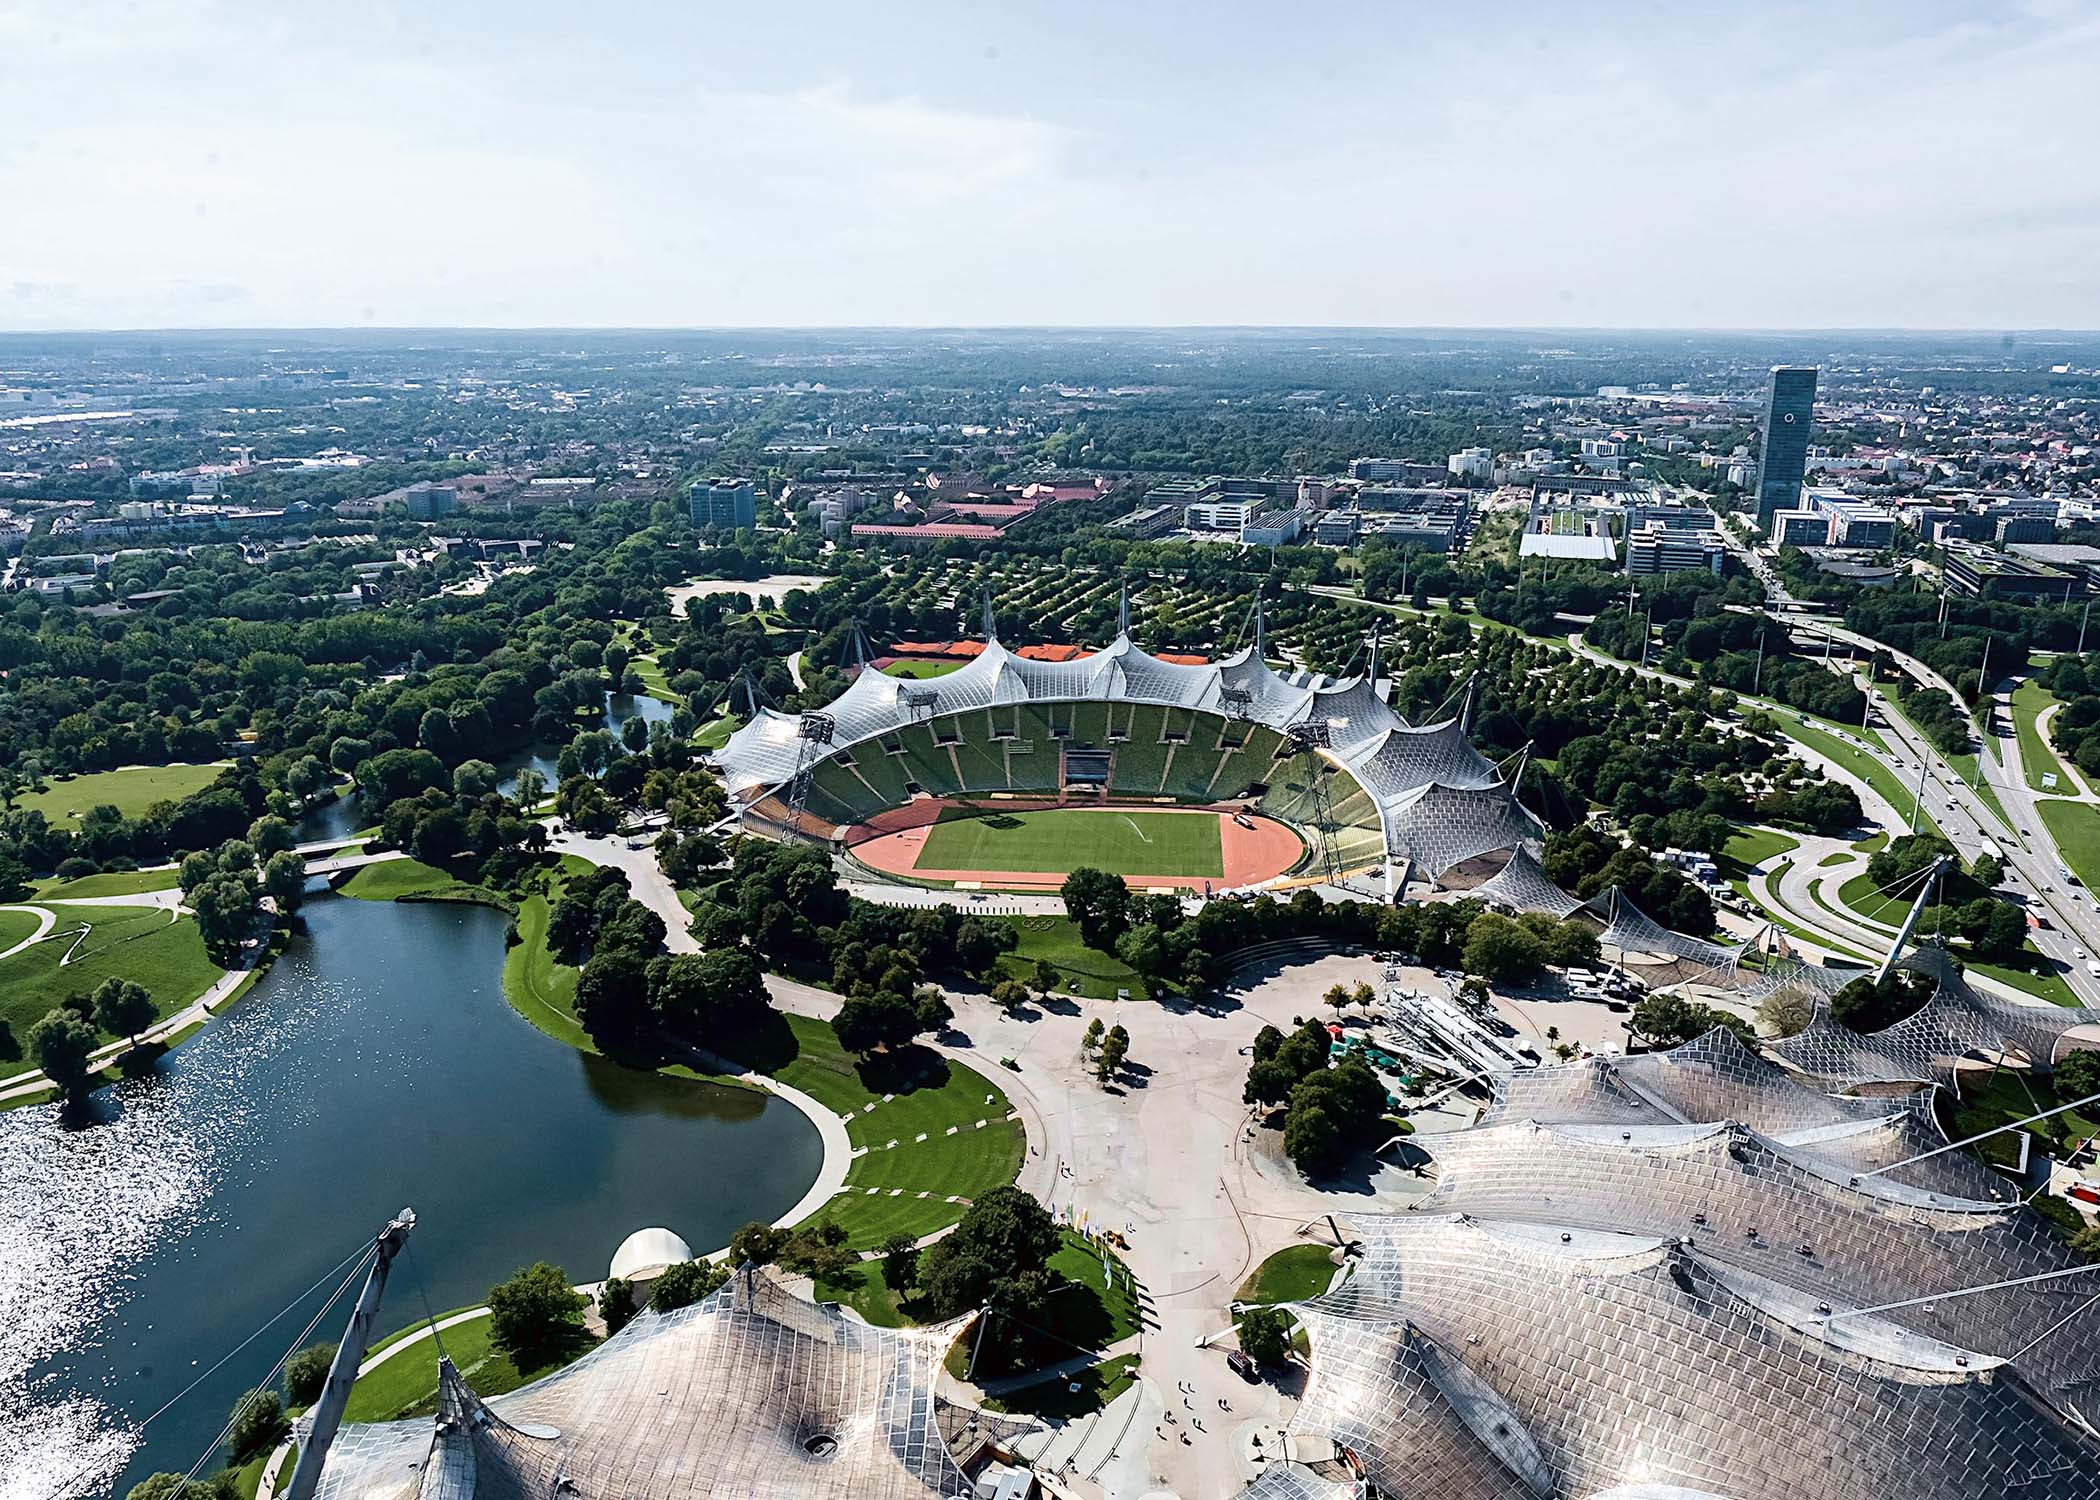 The Olympic Park in Munich